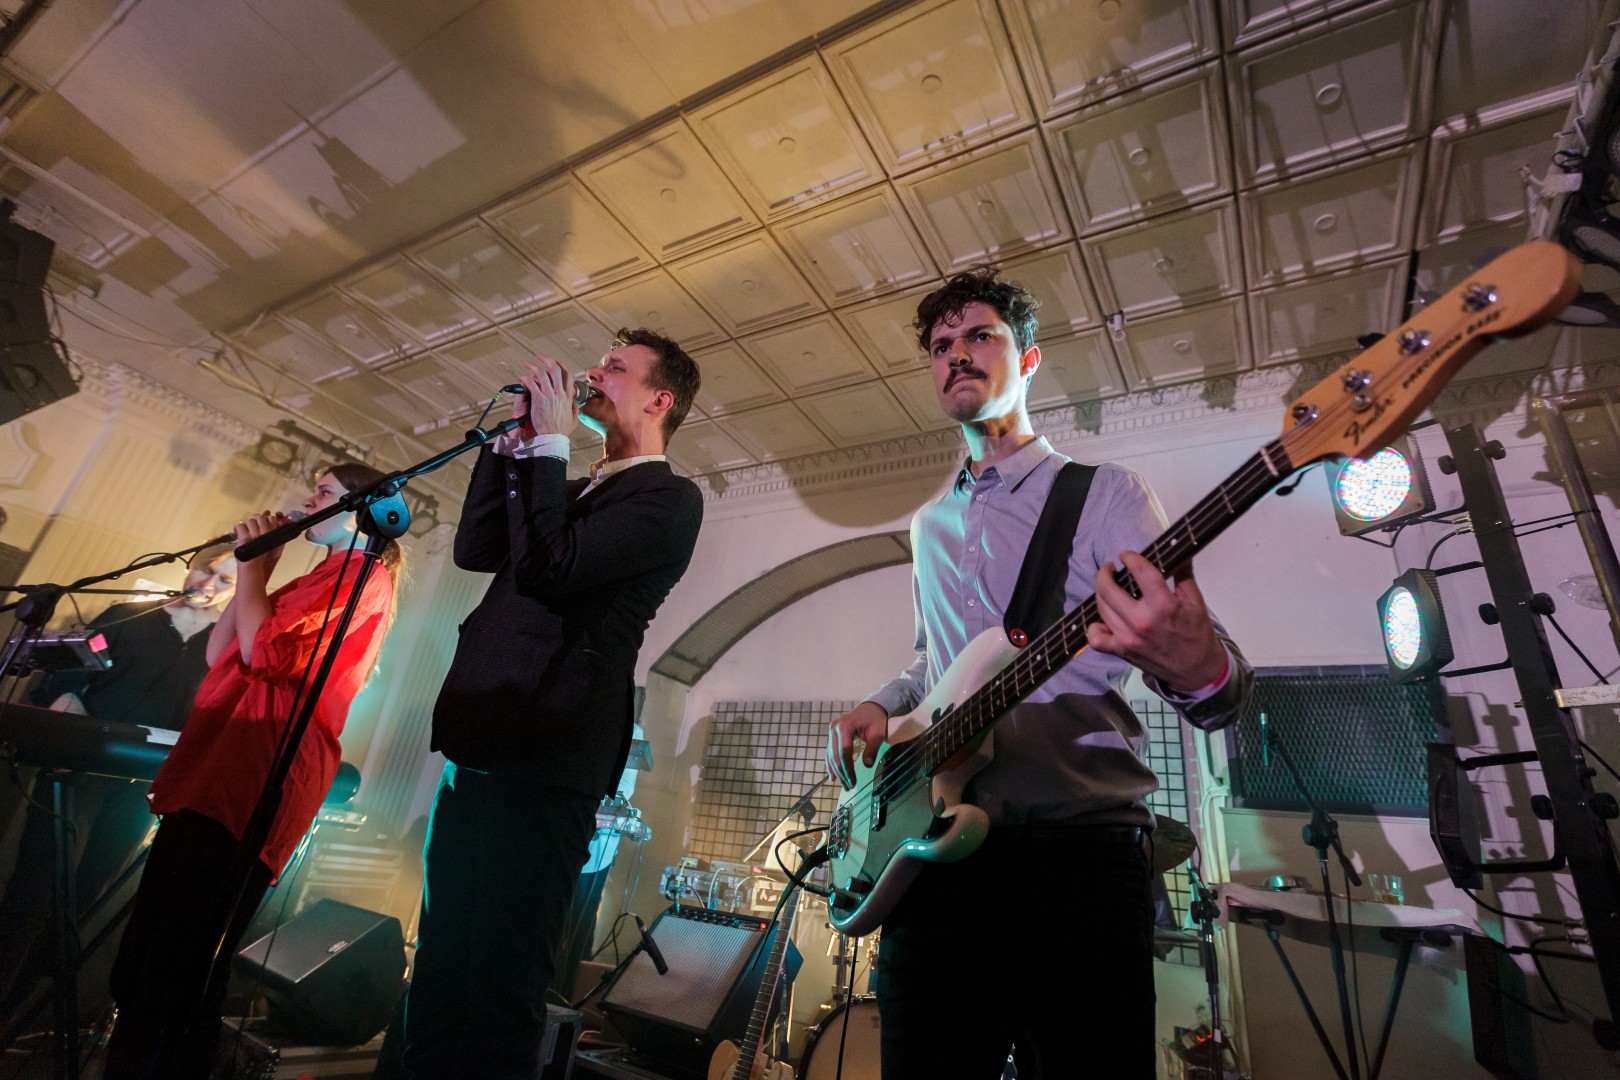 Efterklang at Control Club in Bucharest on November 14, 2013 (c6a37f2bc4)